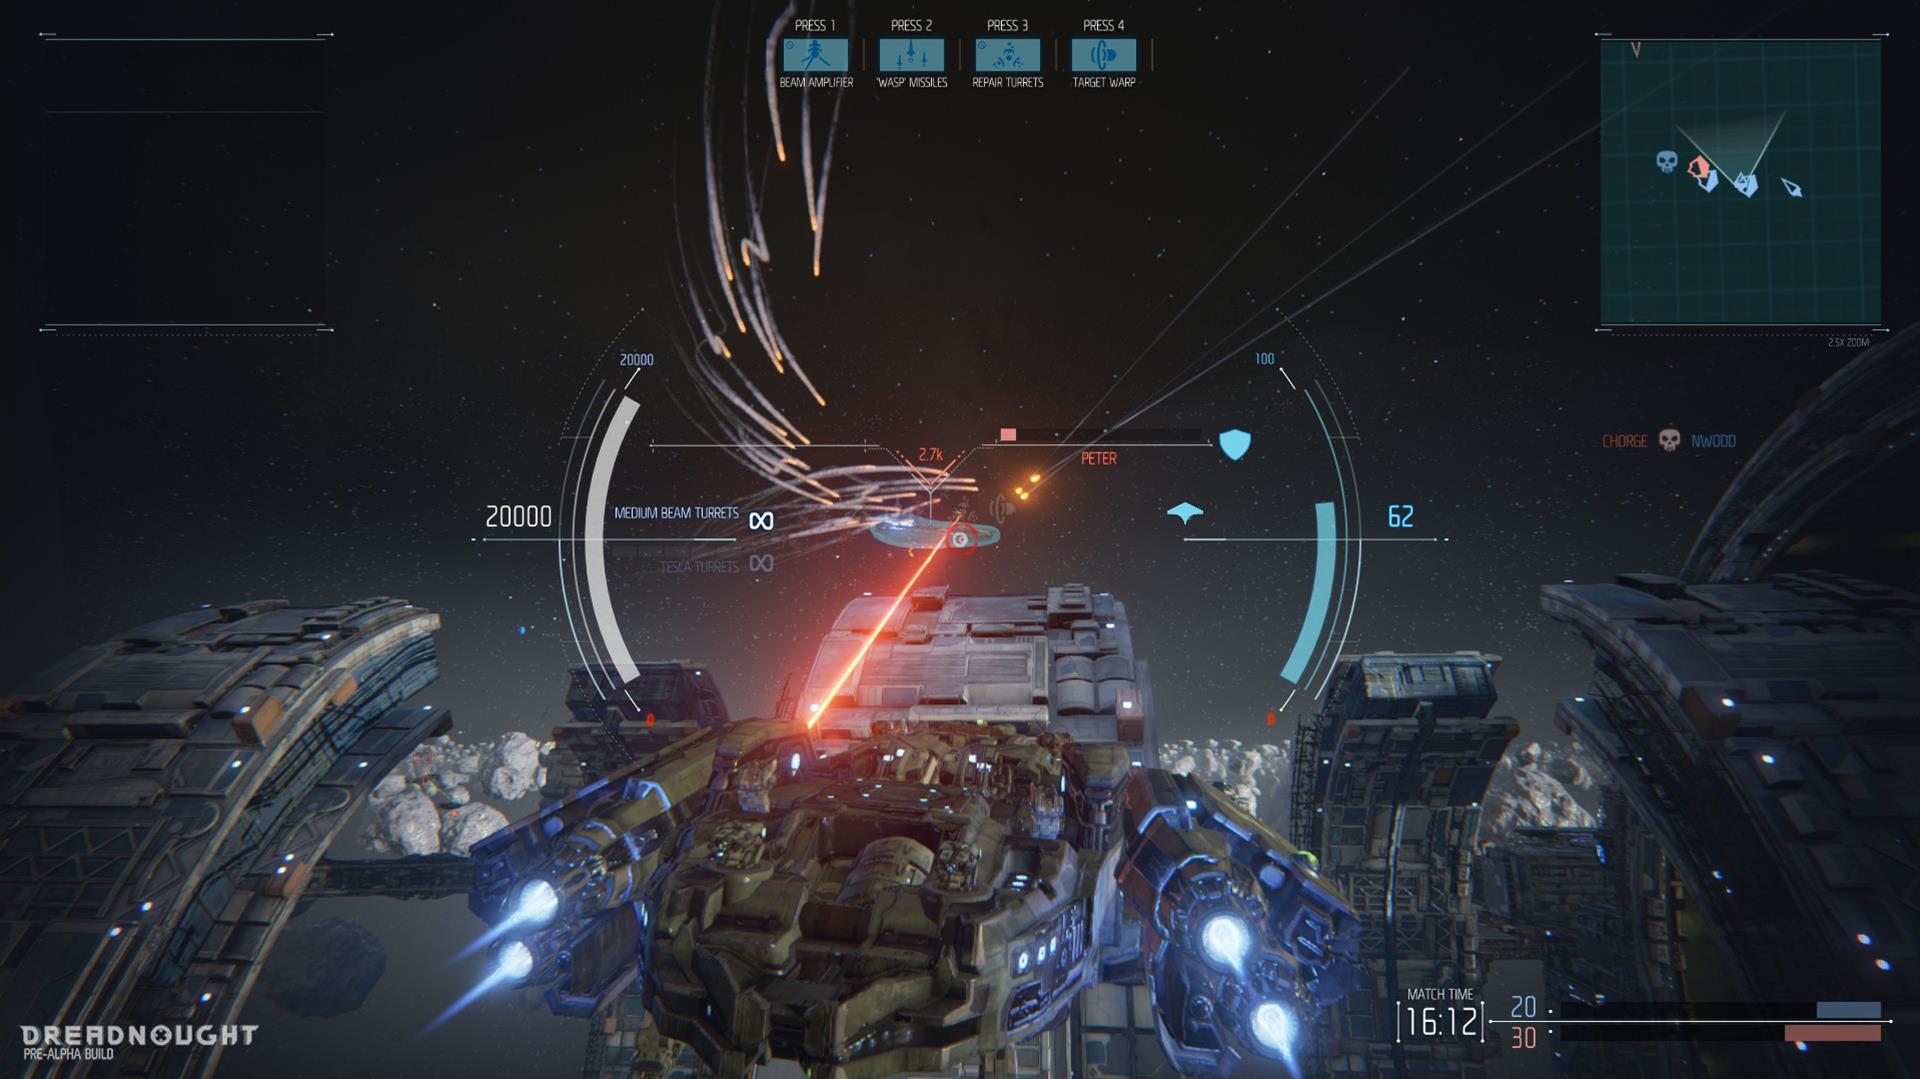 download dreadnought effect